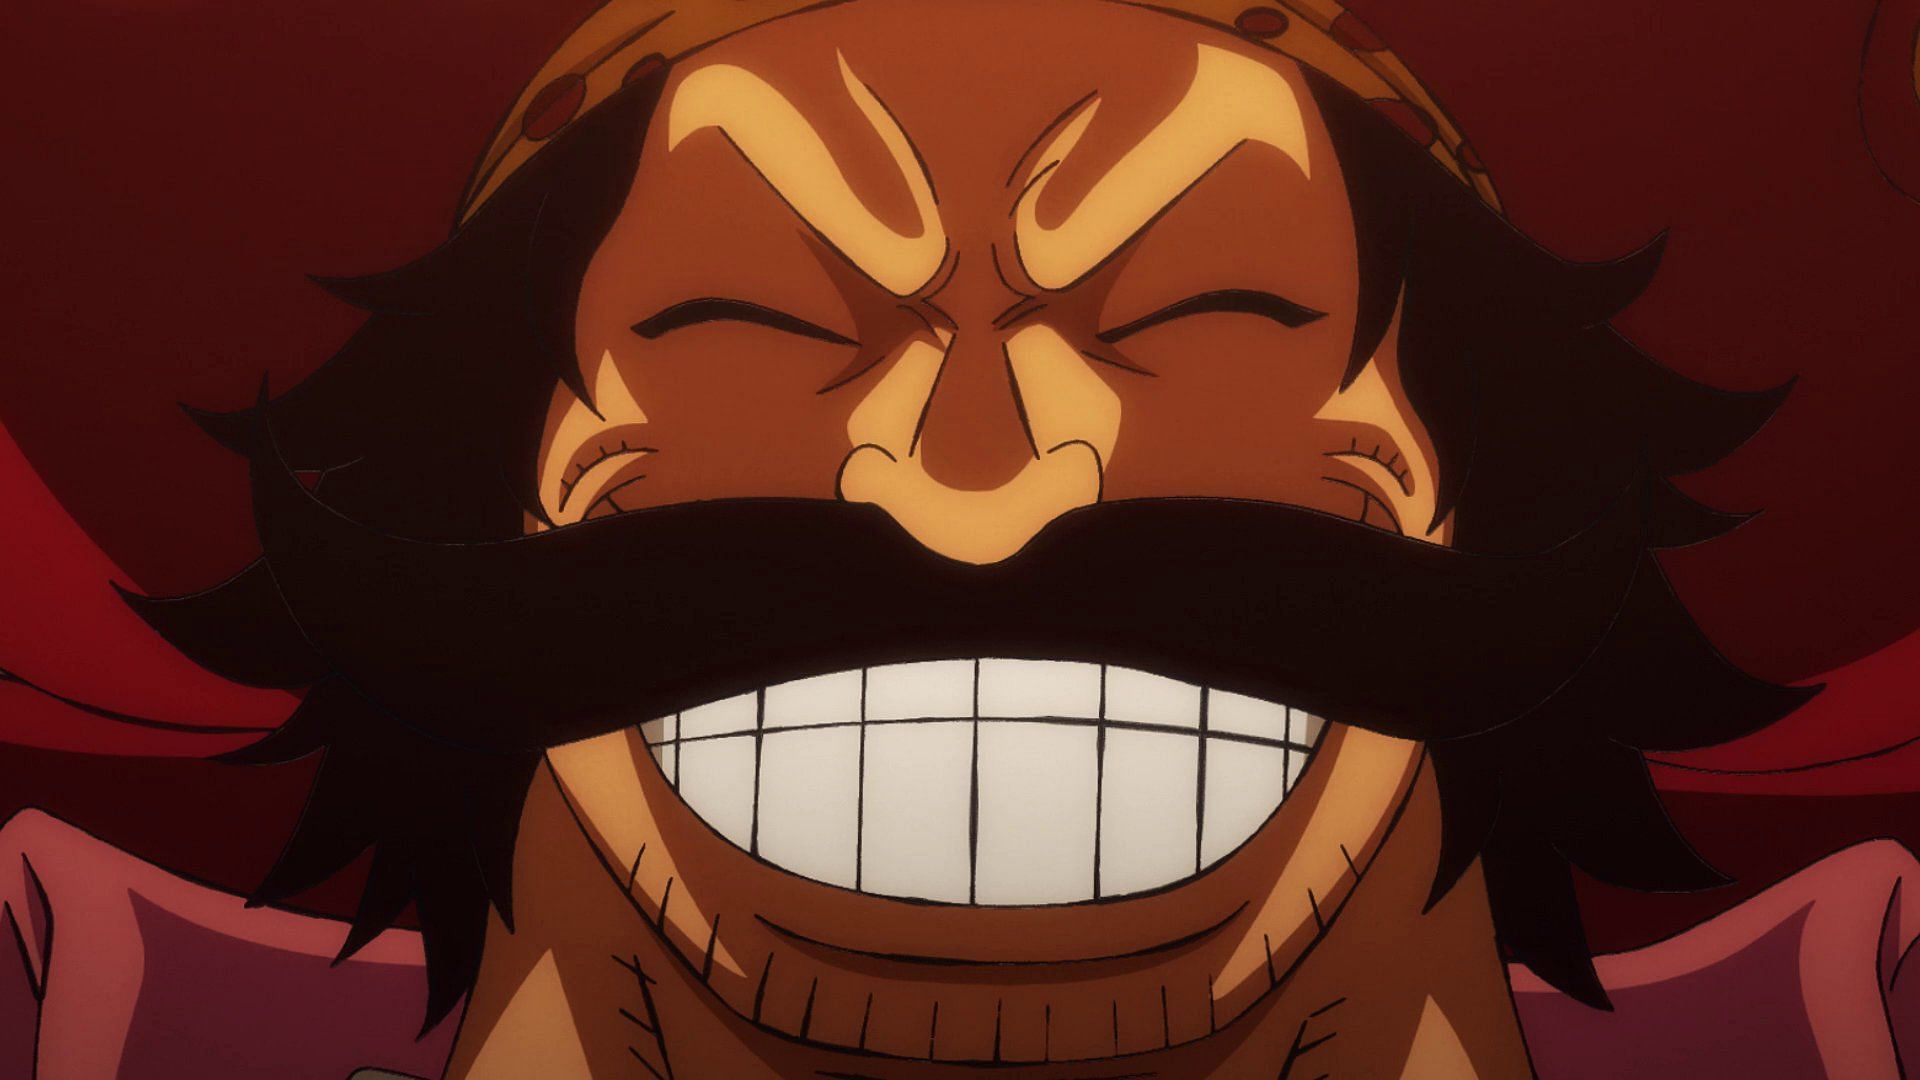 Roger as seen in One Piece (Image via Toei Animation)